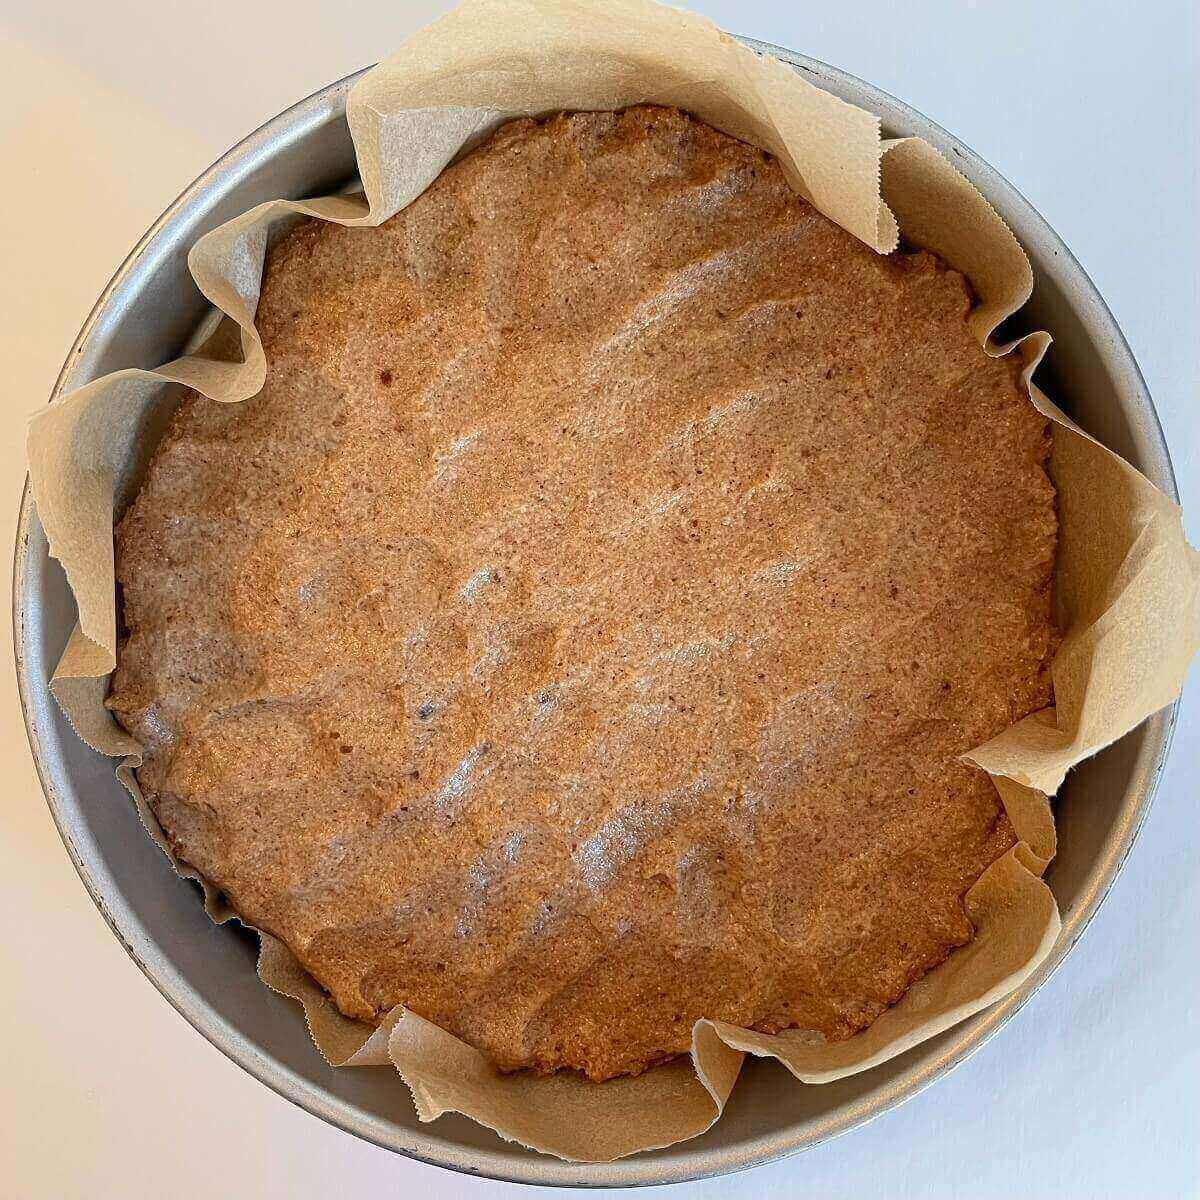 Raw spelt batter in a round baking pan lined with parchment paper.